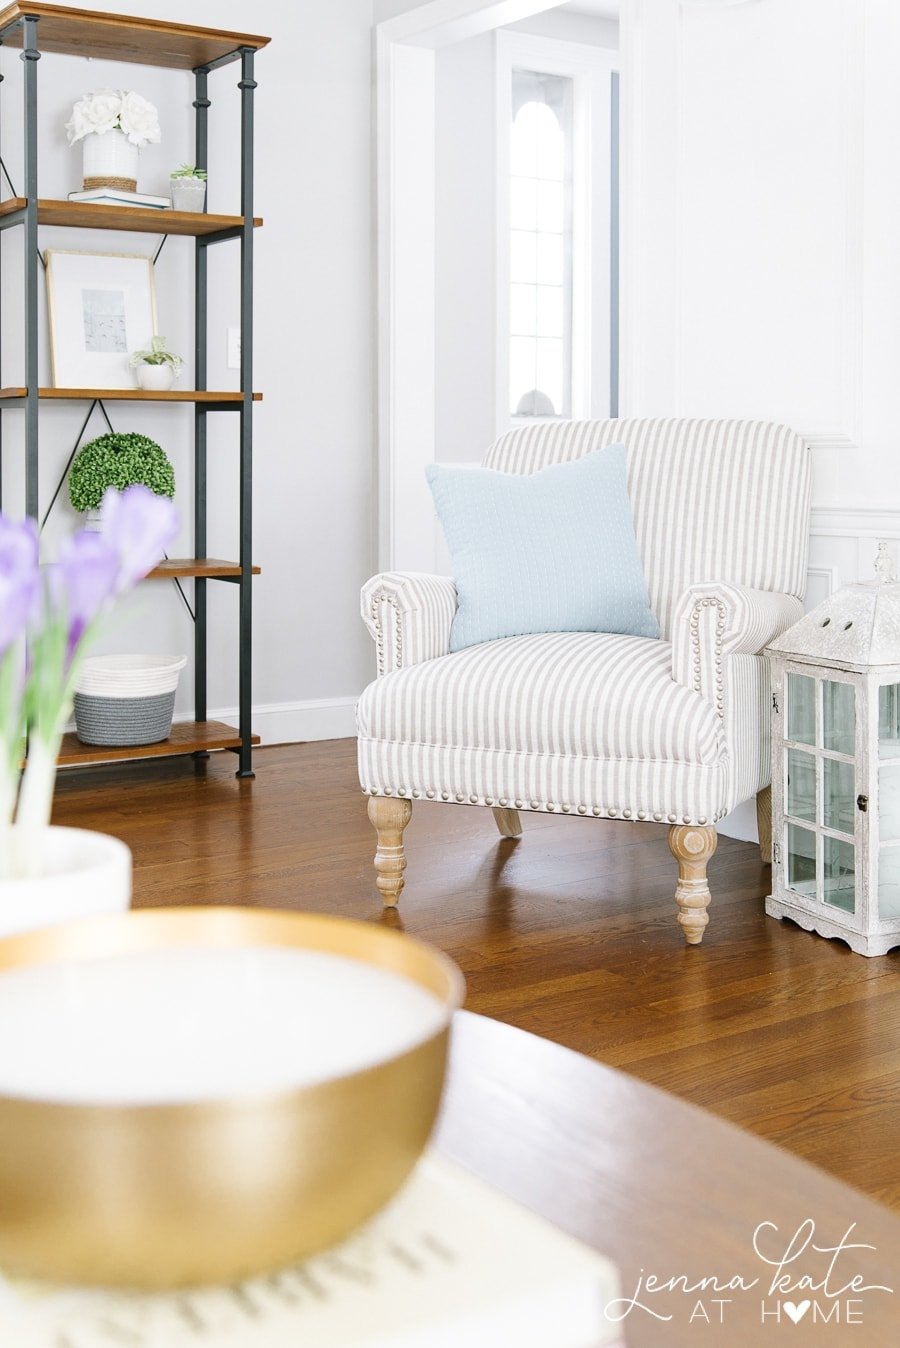 Spring decorating ideas for the living room